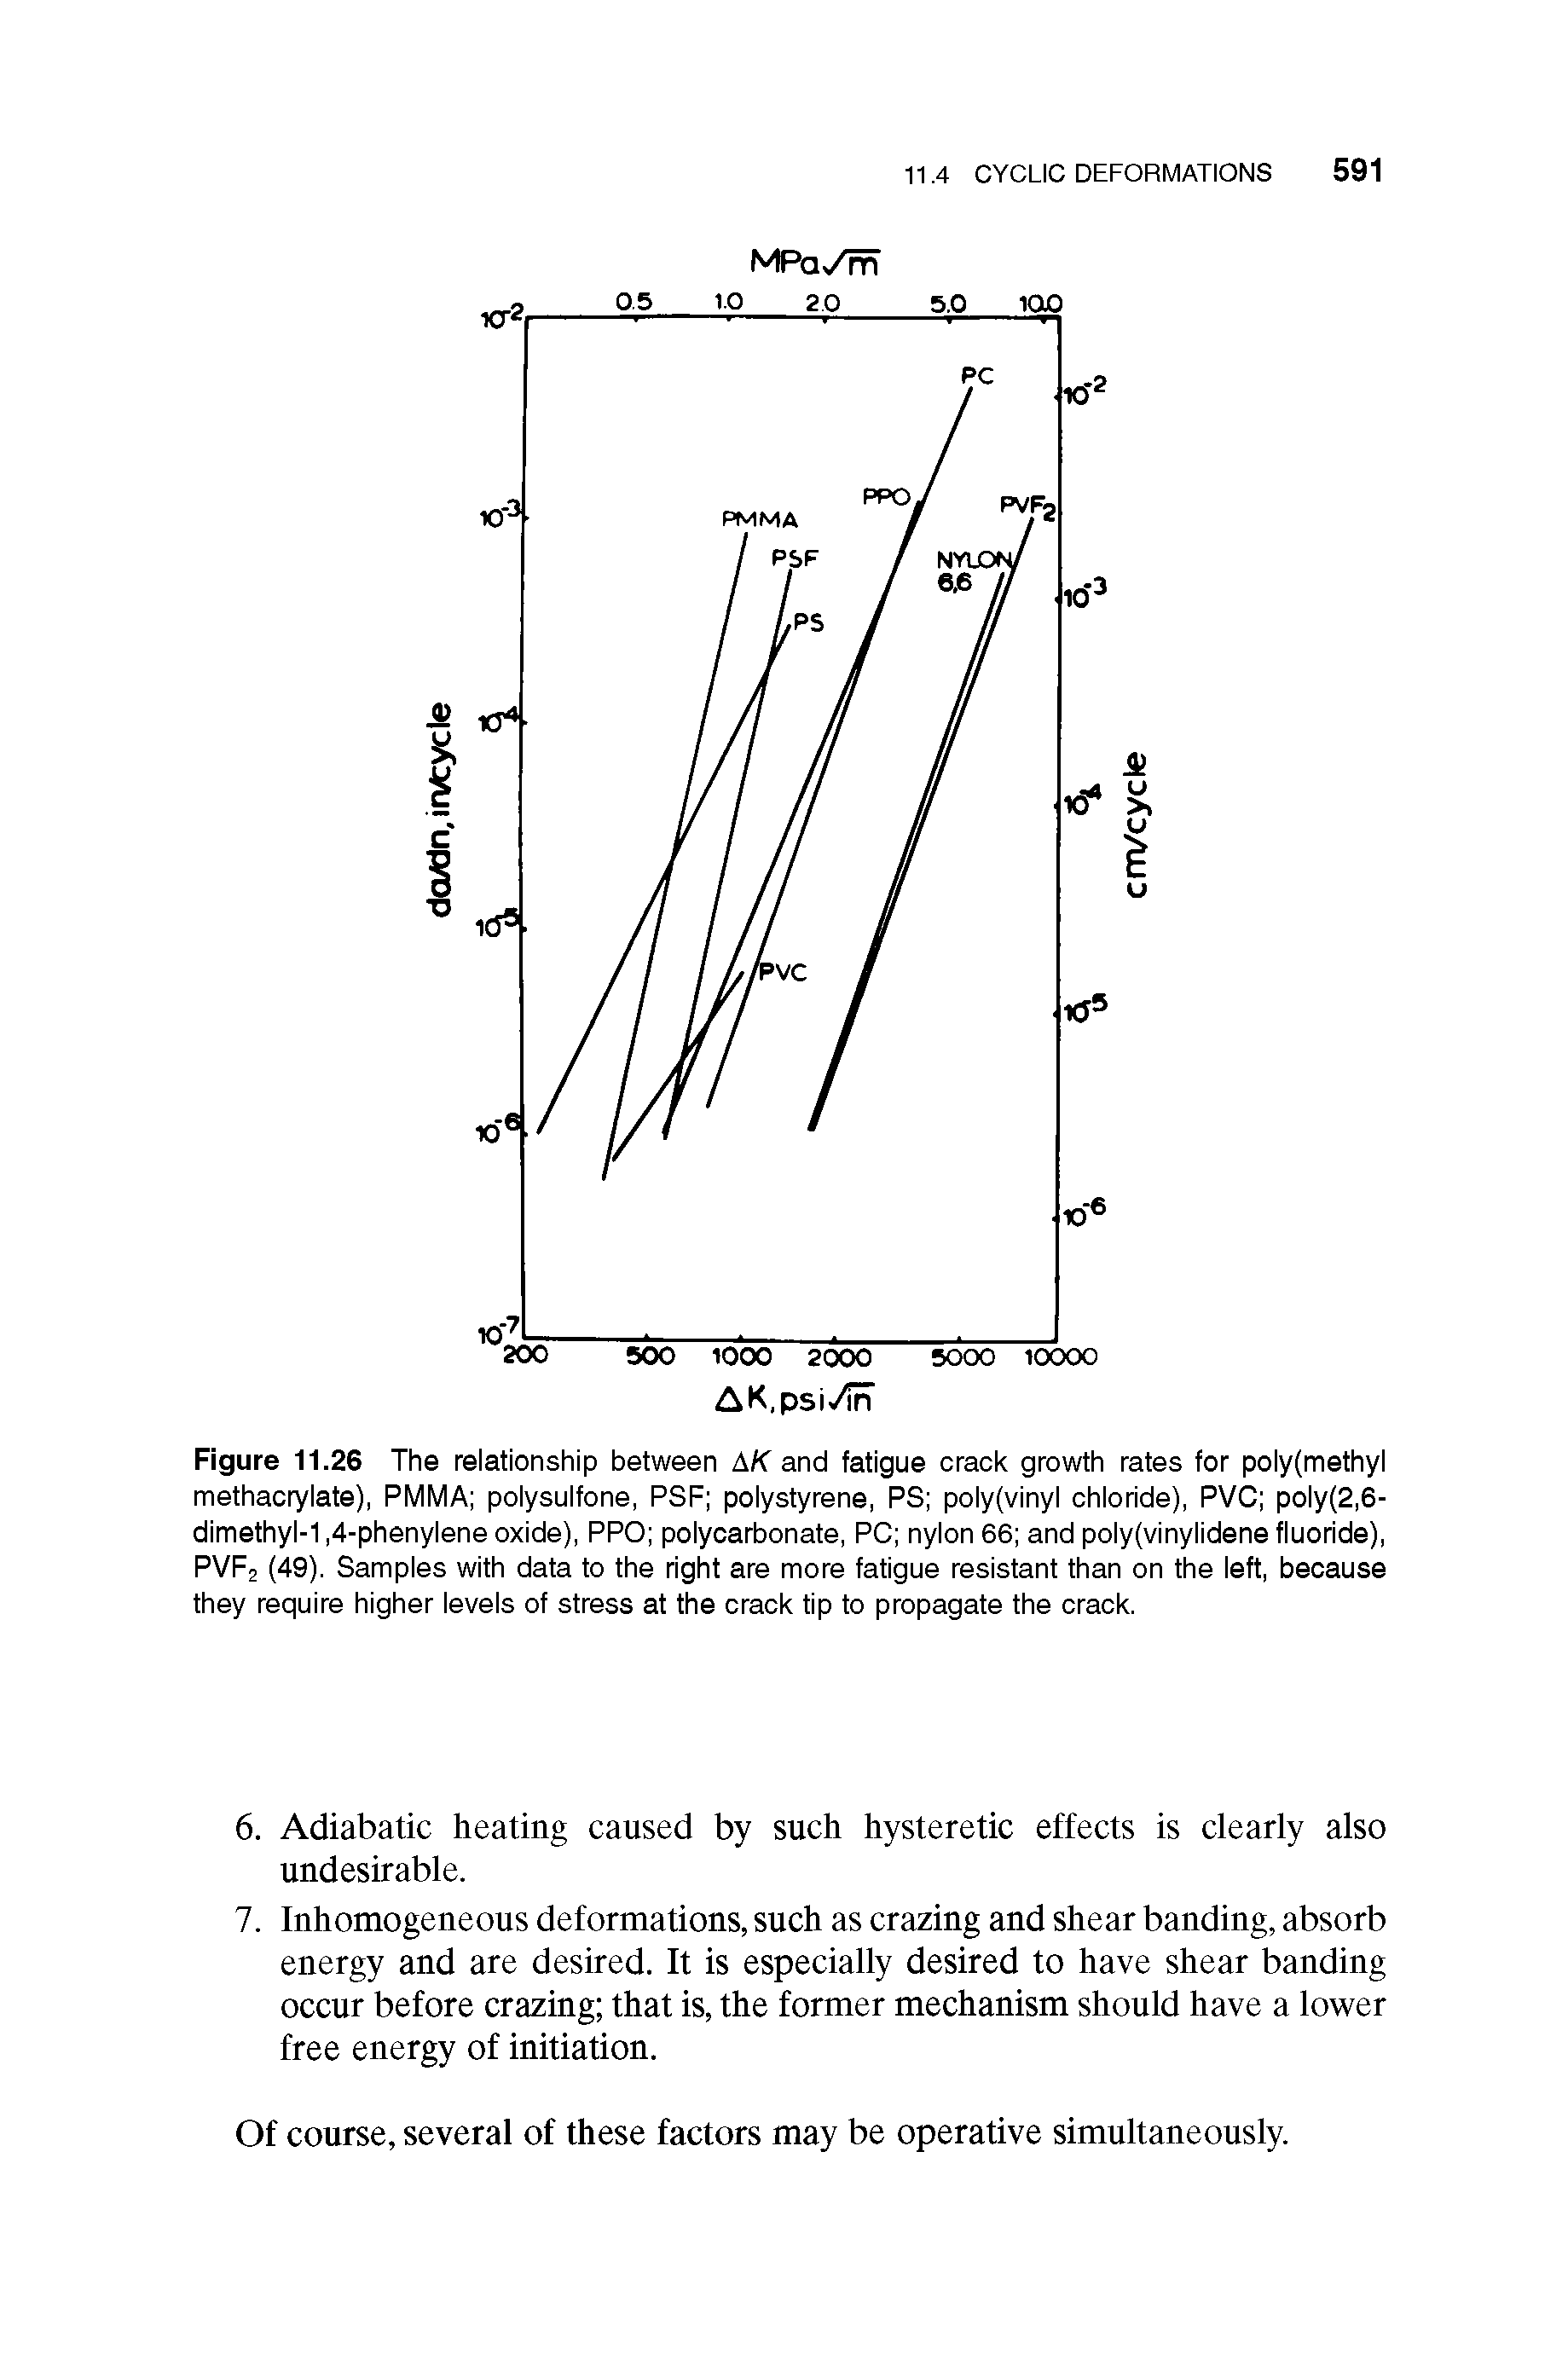 Figure 11.26 The relationship between AK and fatigue crack growth rates for poly(methyl methacrylate), PMMA polysulfone, PSF polystyrene, PS polyfvinyl chloride), PVC poly(2,6-dimethyl-1,4-phenylene oxide), PPO polycarbonate, PC nylon 66 and polyfvinylidene fluoride), PVp2 (49). Samples with data to the right are more fatigue resistant than on the left, because they require higher levels of stress at the crack tip to propagate the crack.